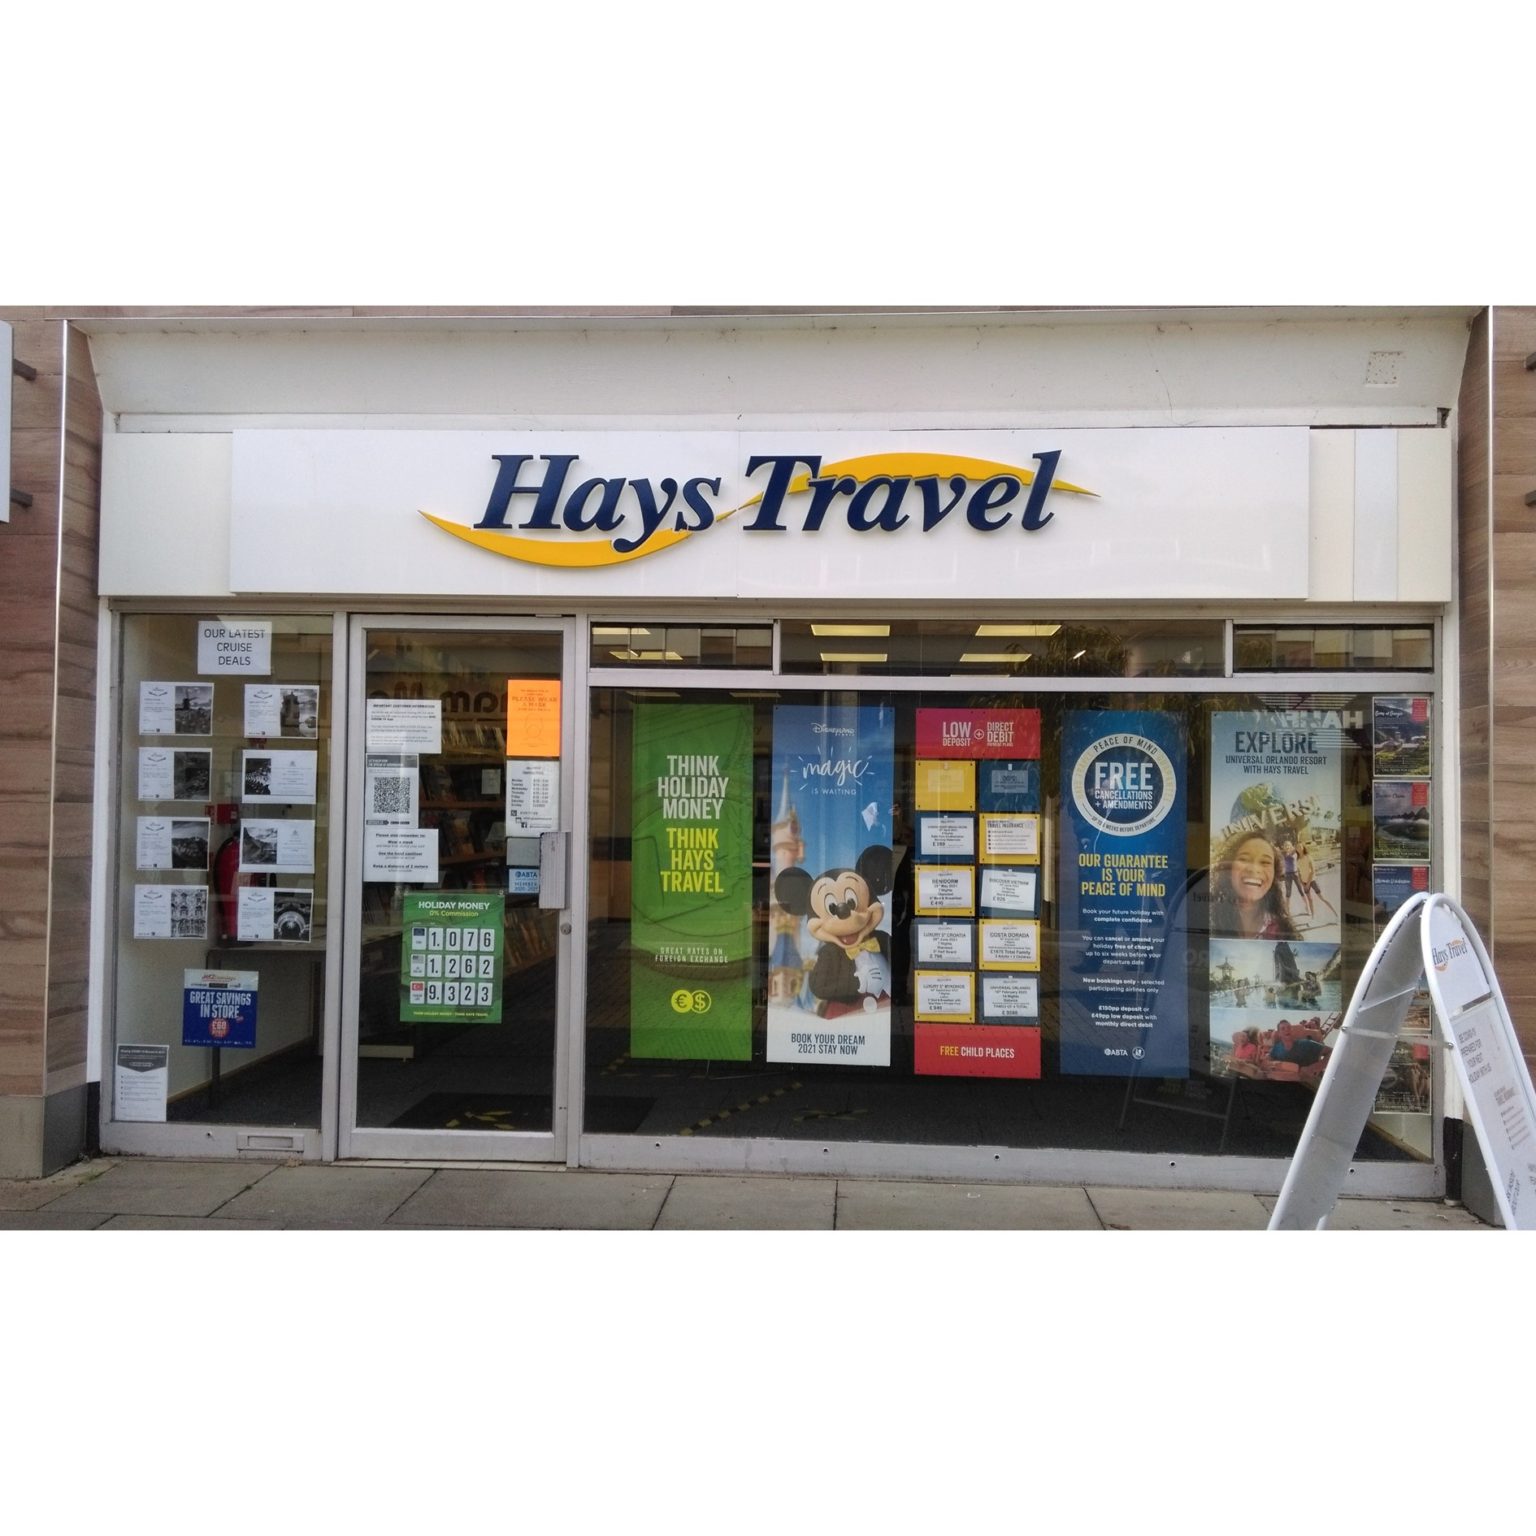 hays travel morpeth opening times